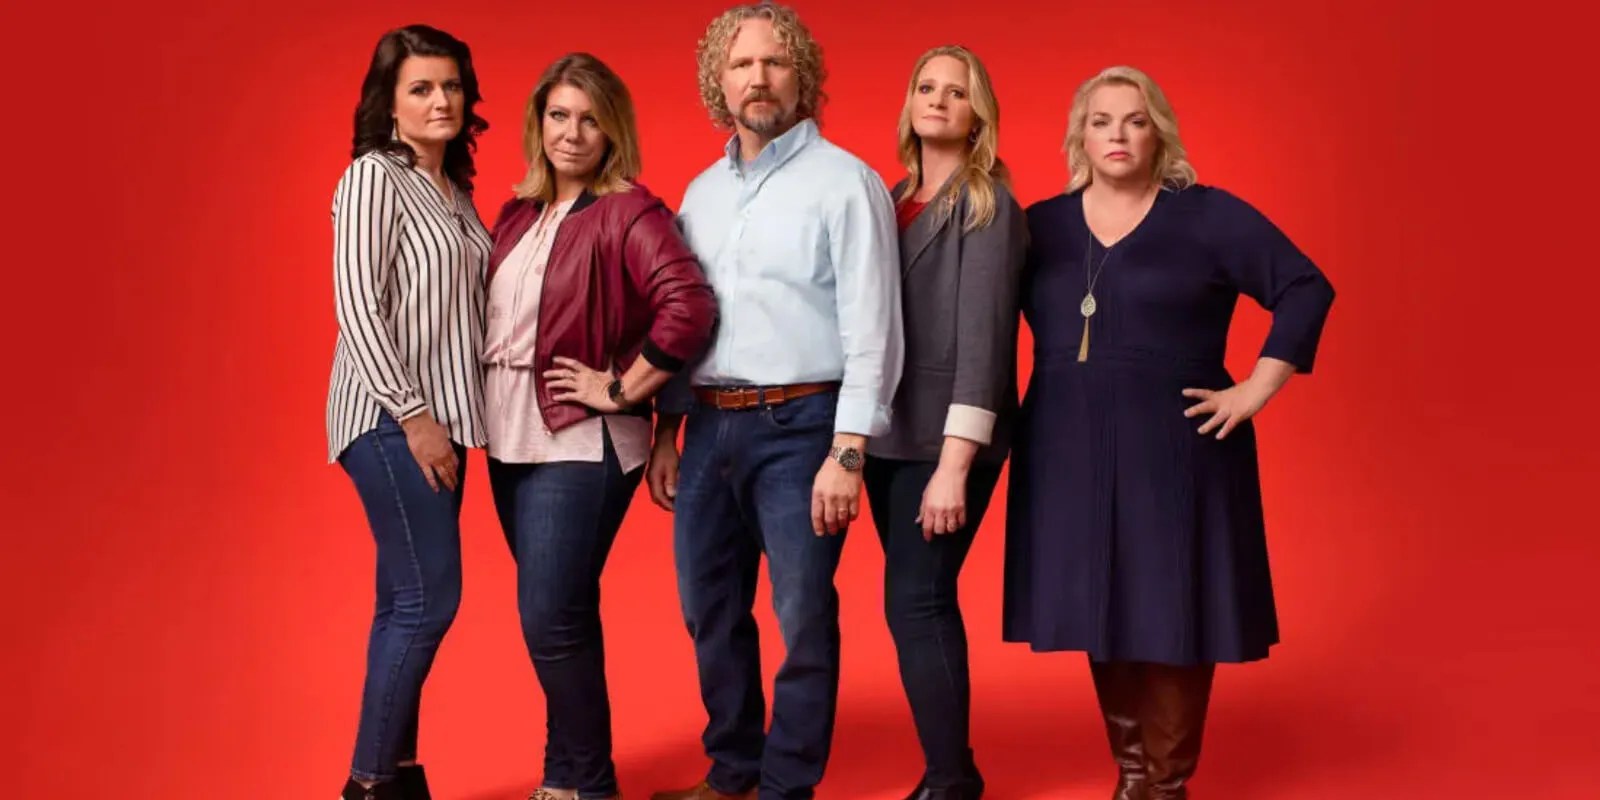 Robyn, Meri, Kody, Janelle, and Christine Brown during season 14 of TLC’s ‘Sister Wives’ on TLC.